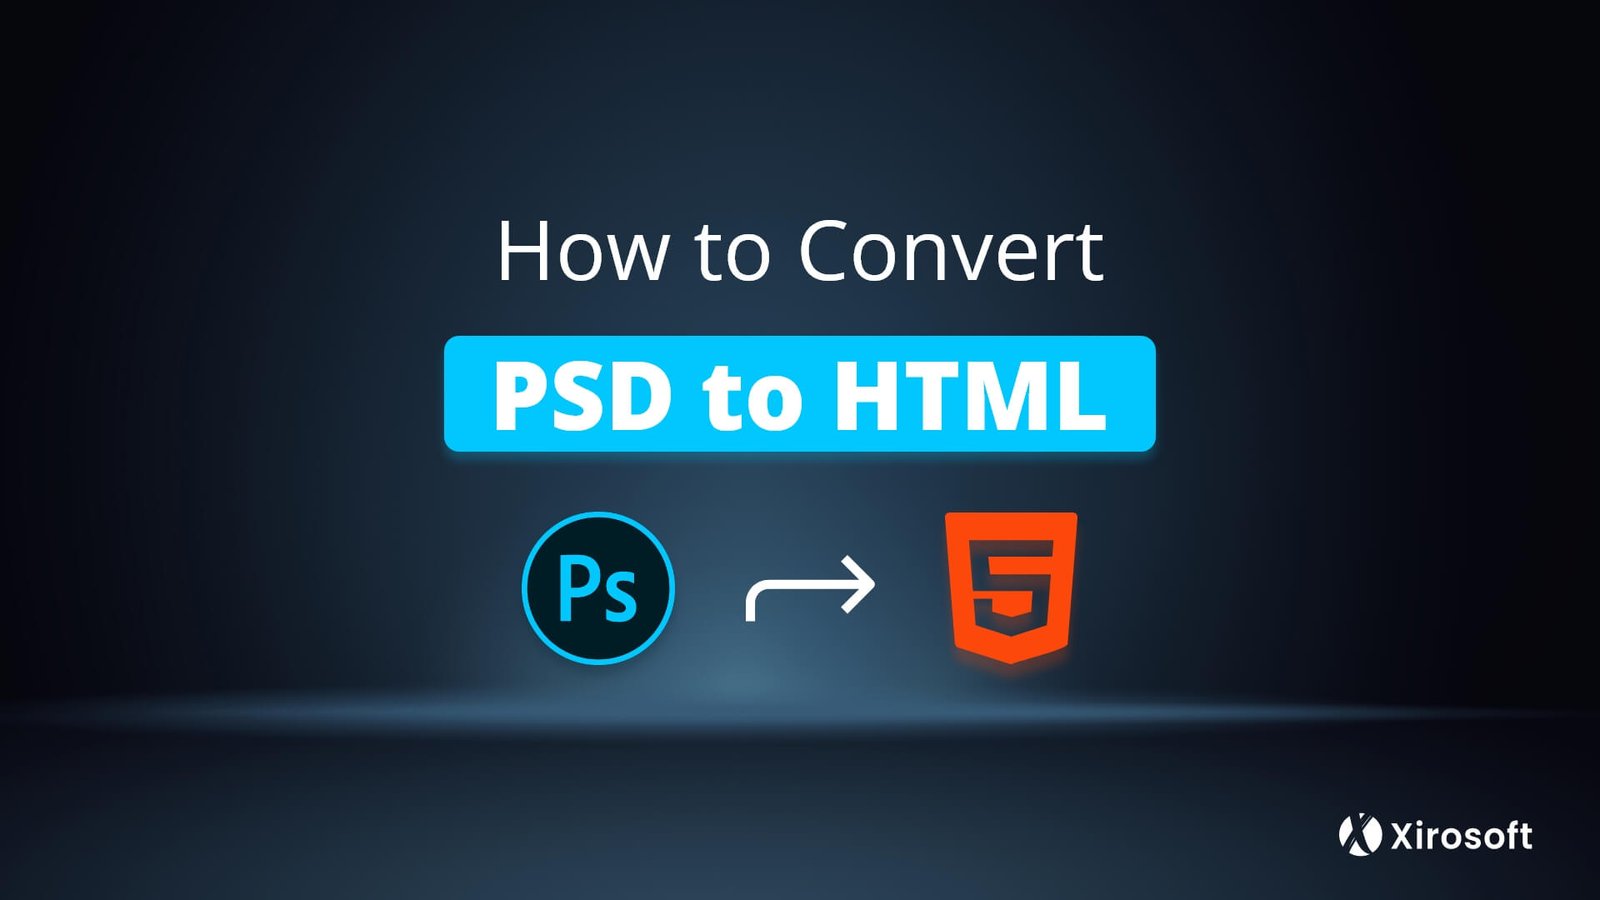 how-to-convert-psd-to-html-step-by-step-tutorial-xirosoft